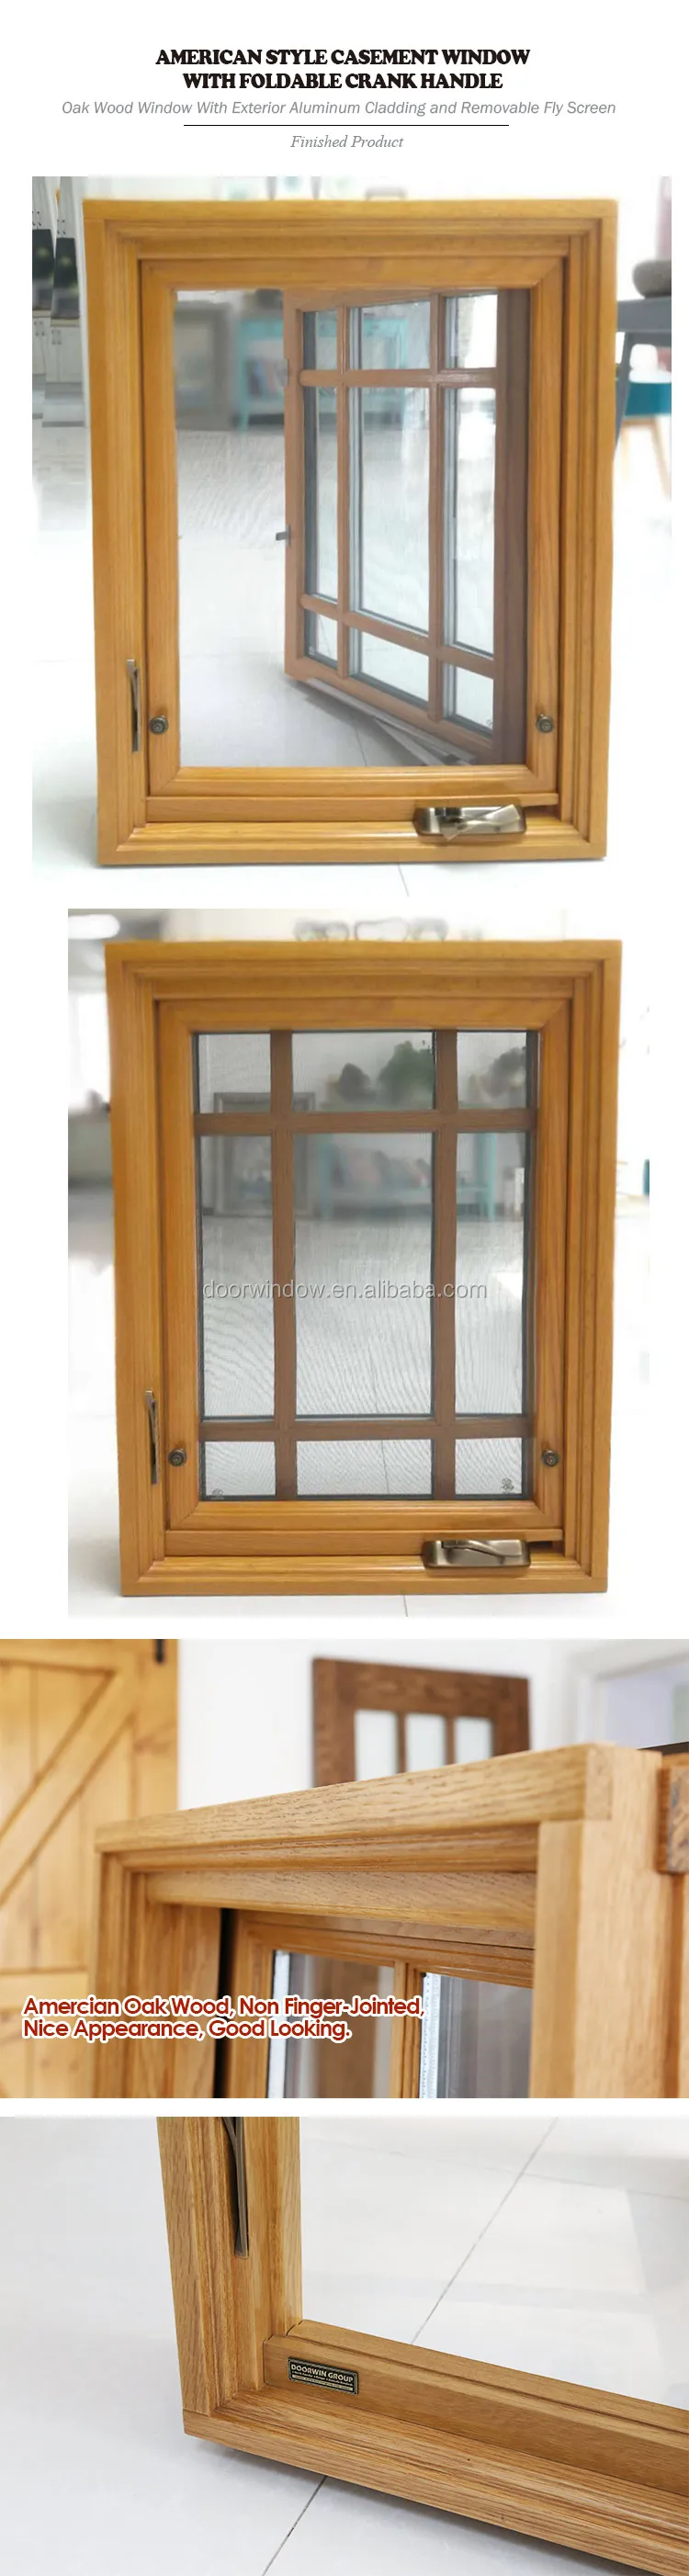 Los Angels popular hot sell window grills design for sliding windows crank casement window 24 x 42 with grille